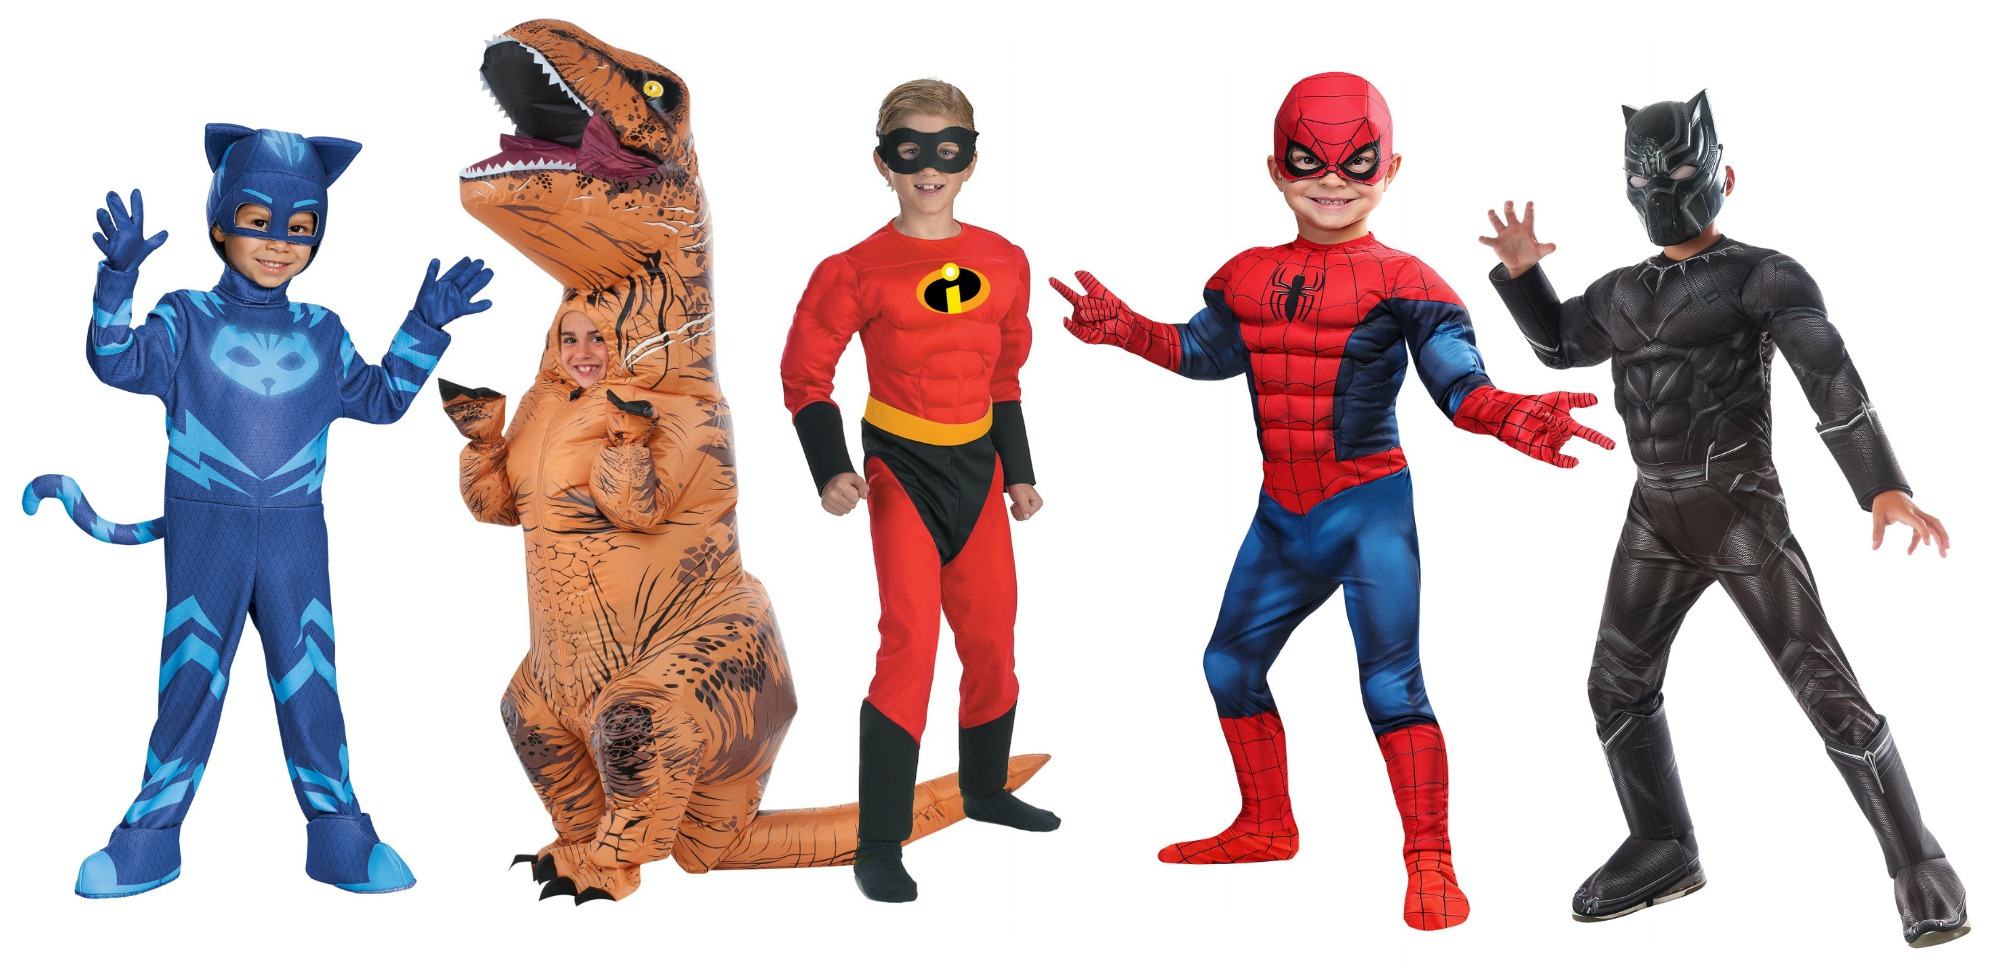 Halloween Dress Up: Costume Ideas for All Ages - FUN.com Blog